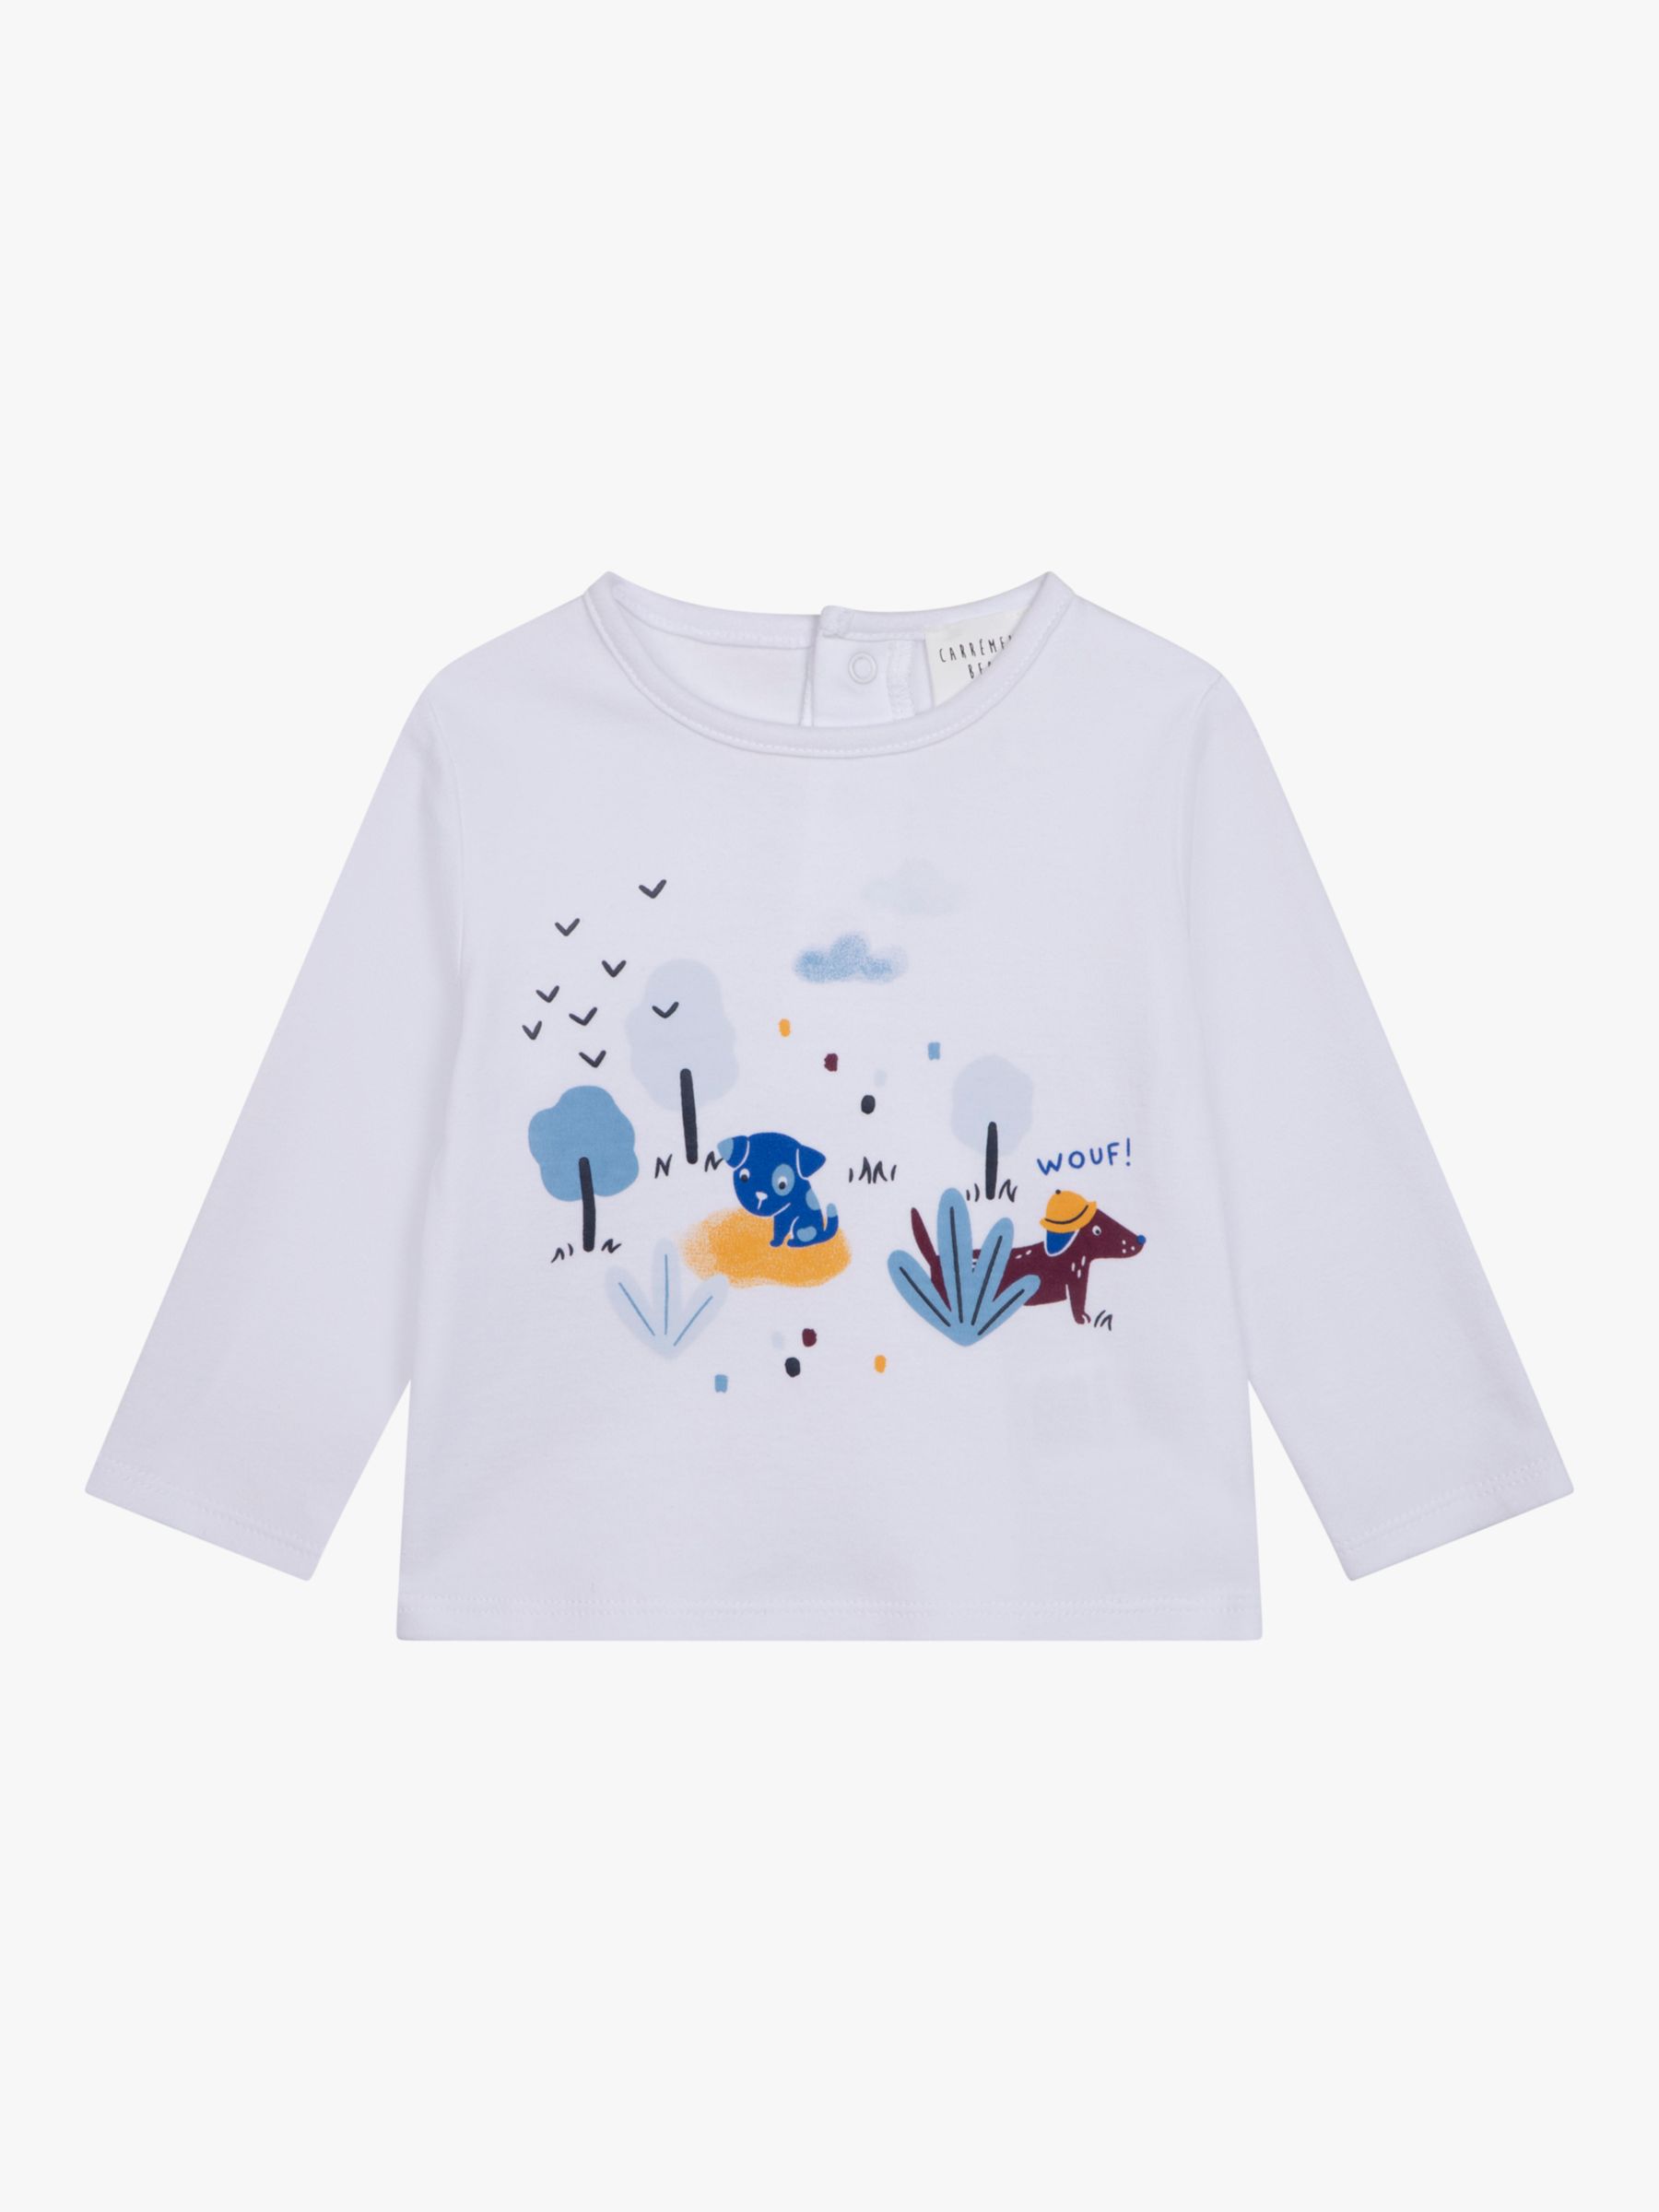 Carrément Beau Baby Dog & Tree Jersey Top, White at John Lewis & Partners